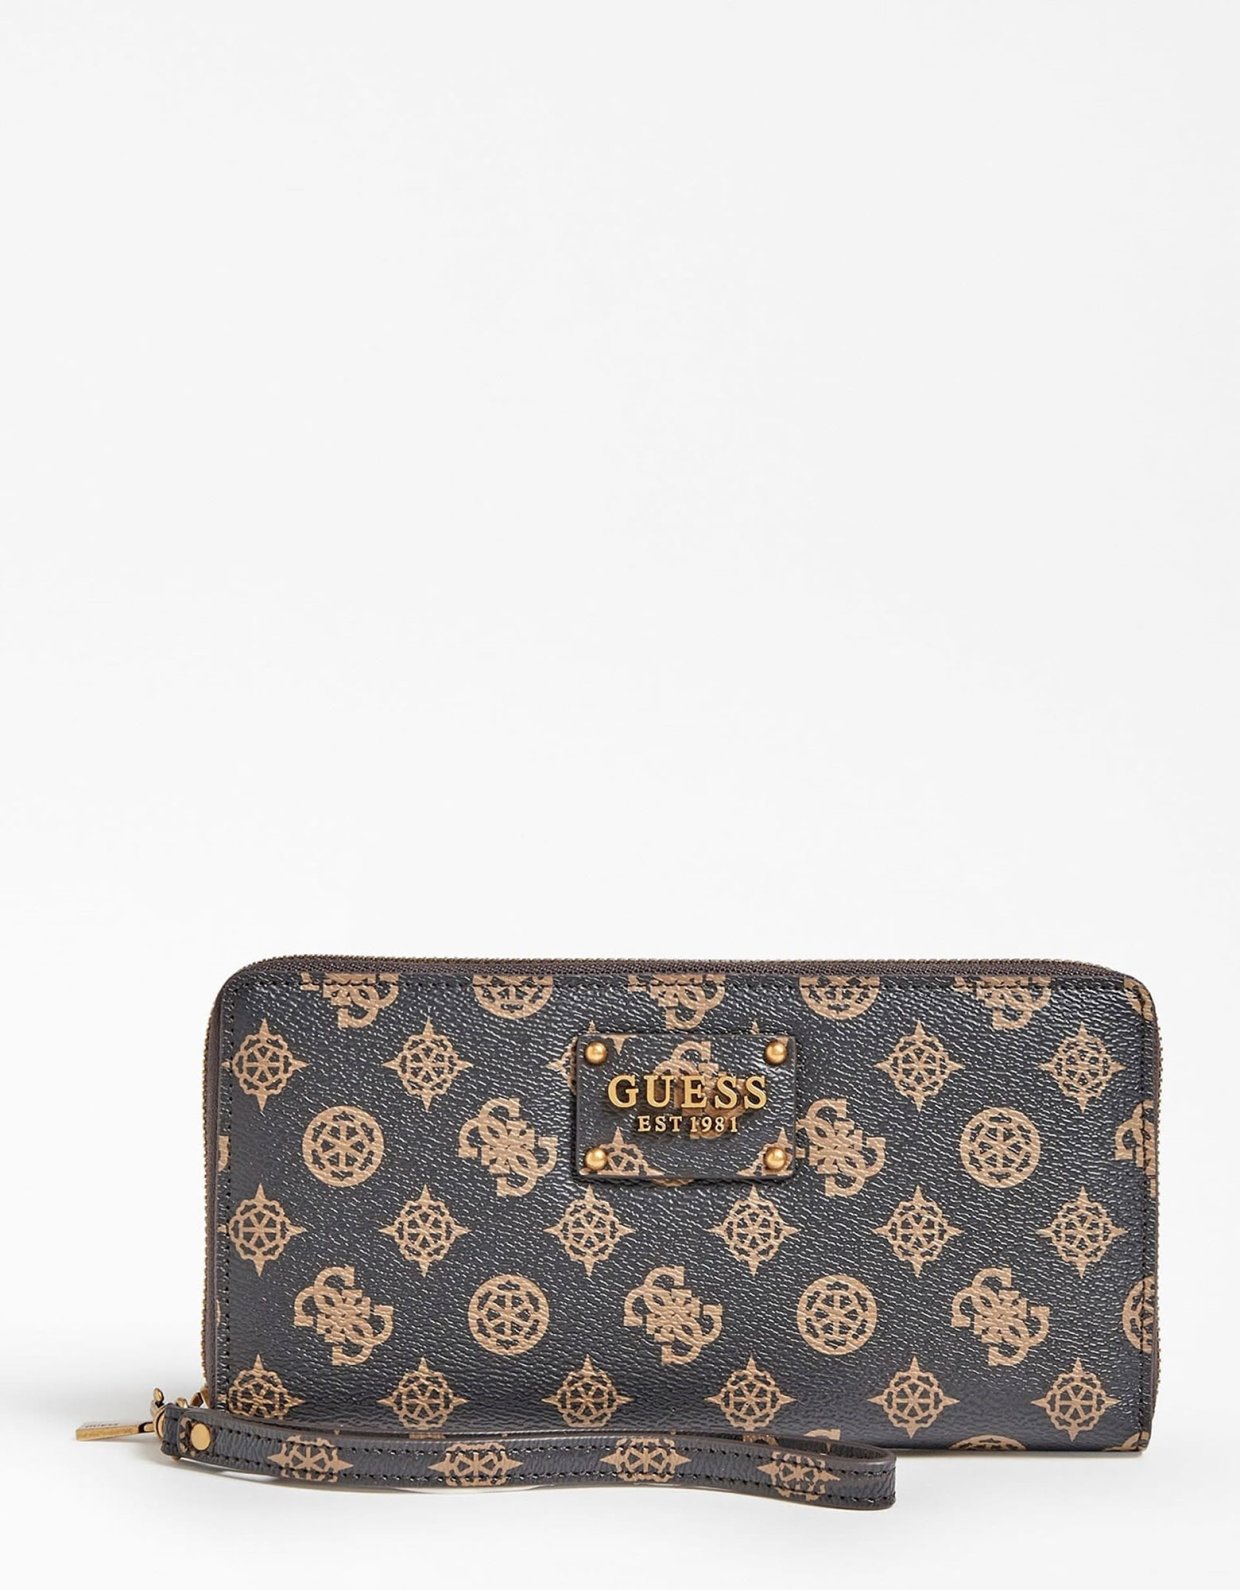 Guess Centre stage slg wallet mocha logo